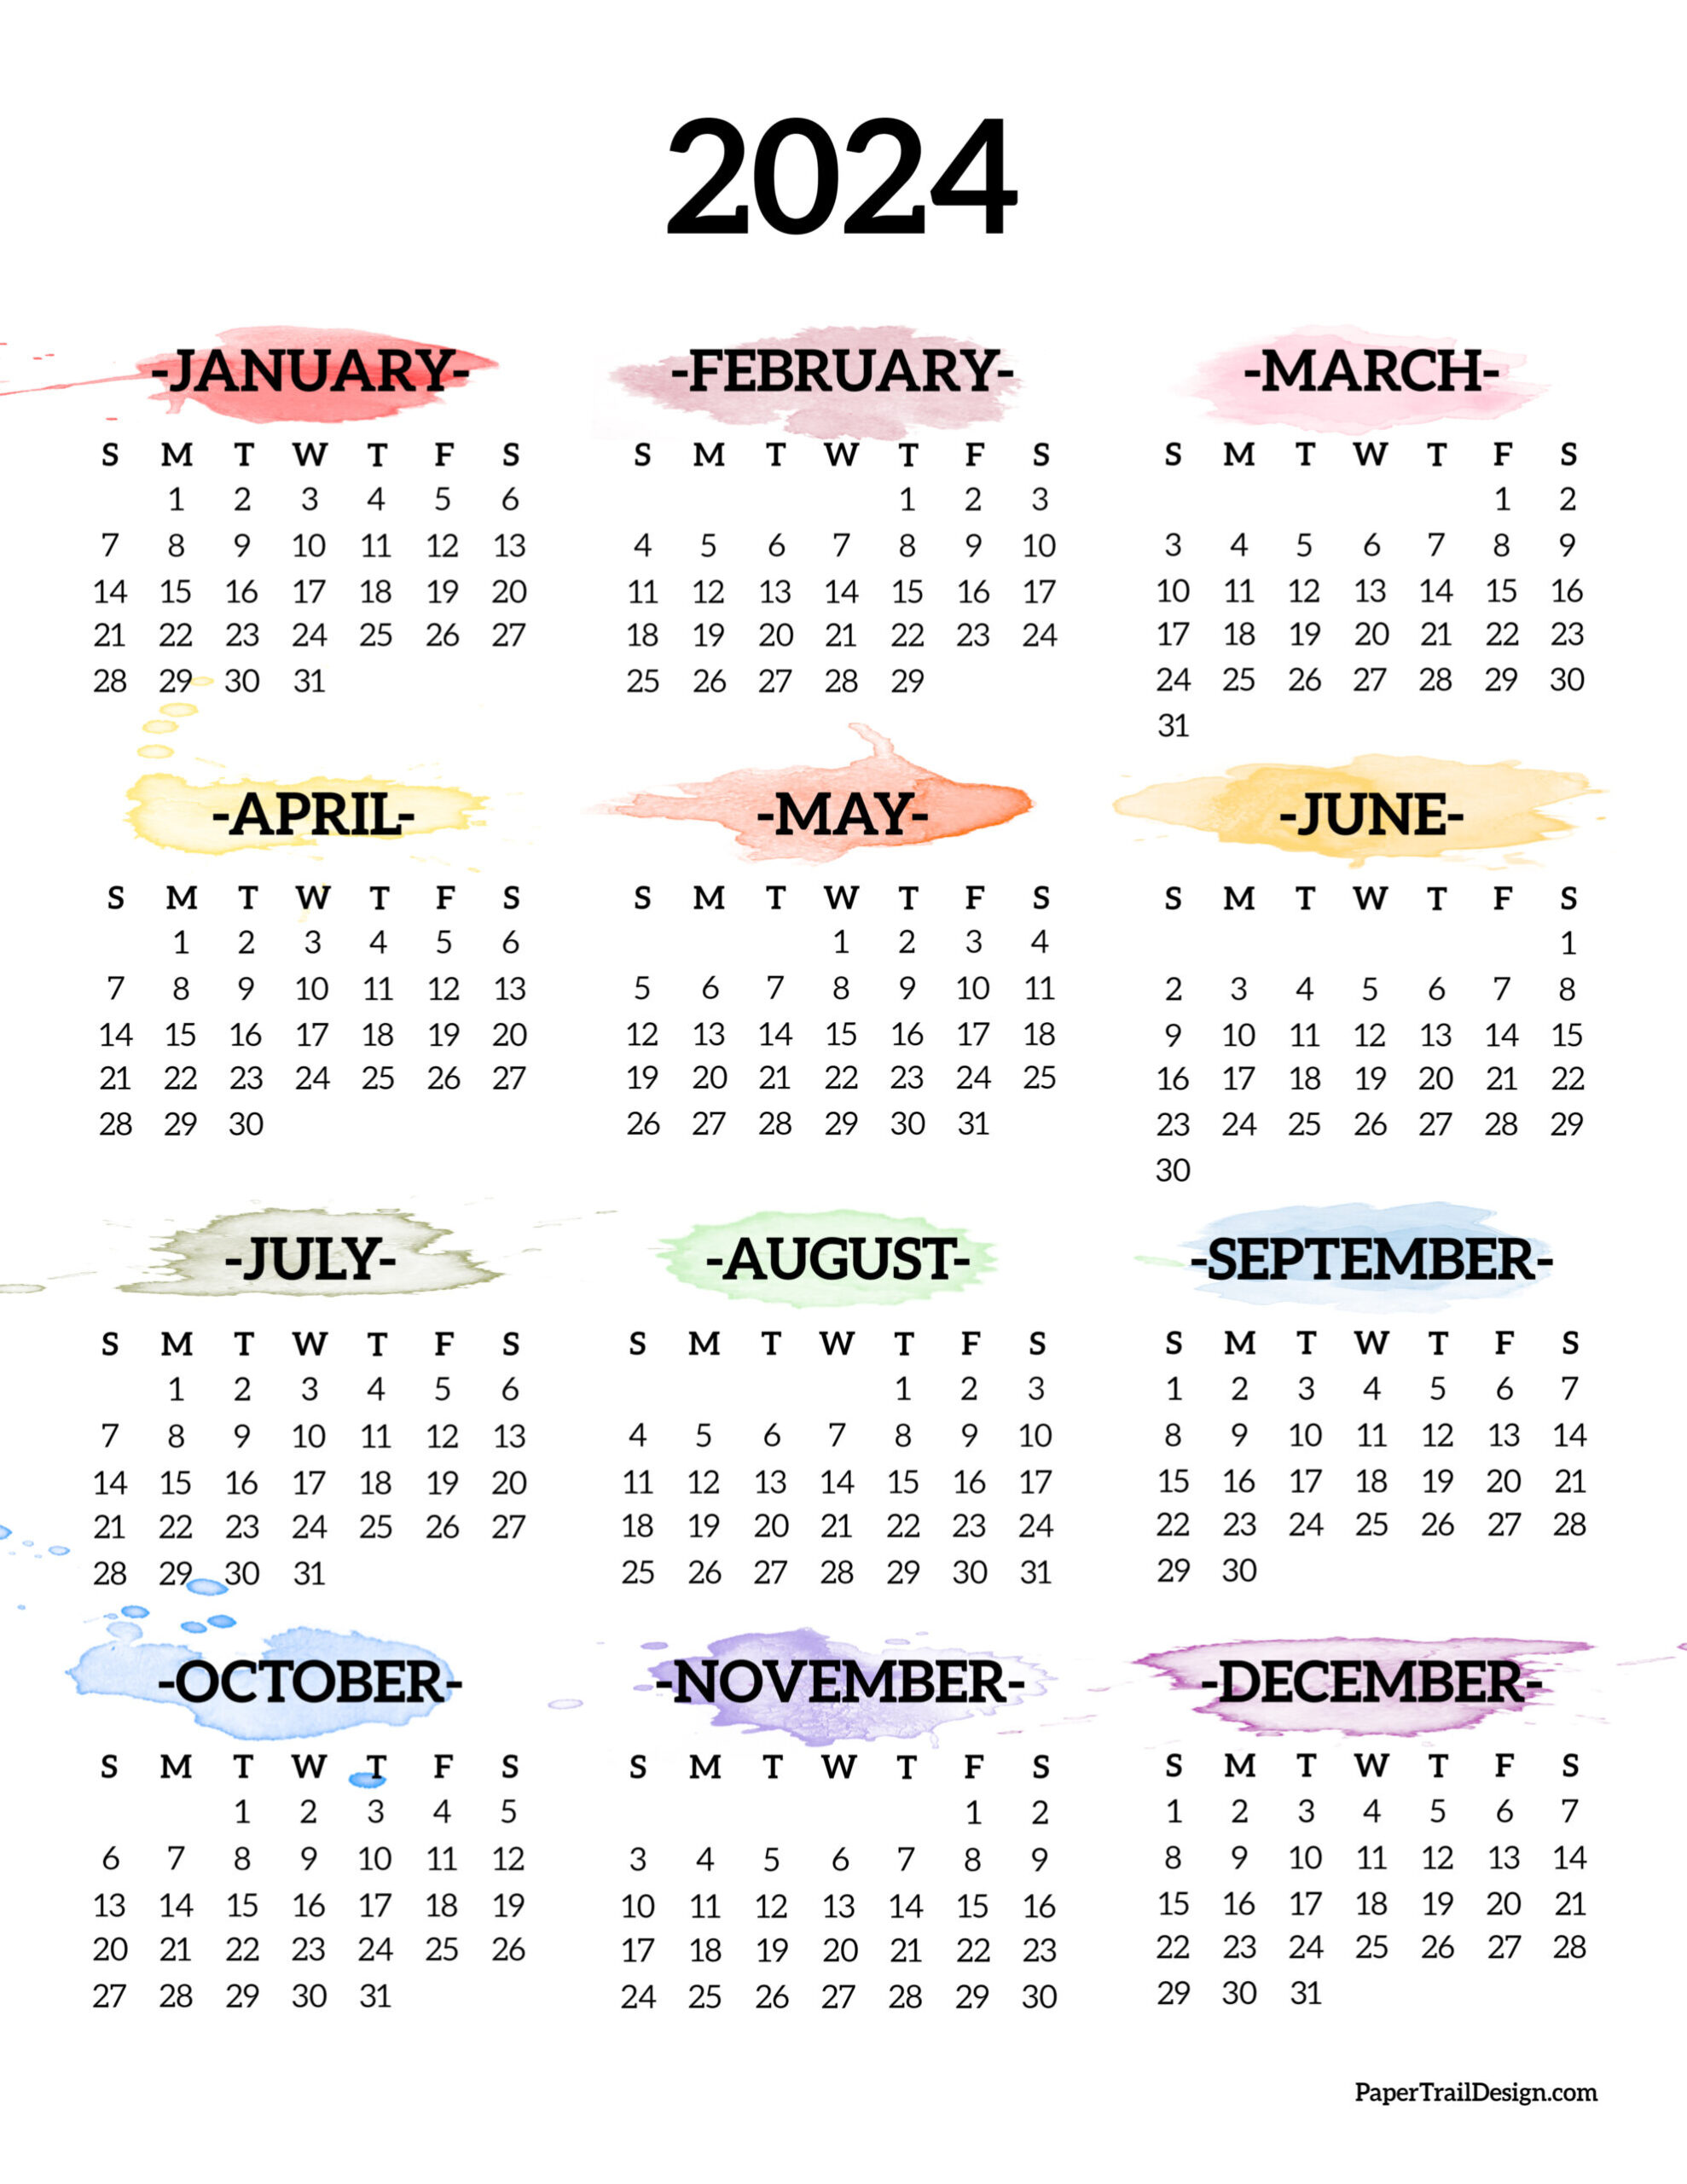 Calendar 2024 Printable One Page - Paper Trail Design | Printable Calendar 2024 Year At A Glance